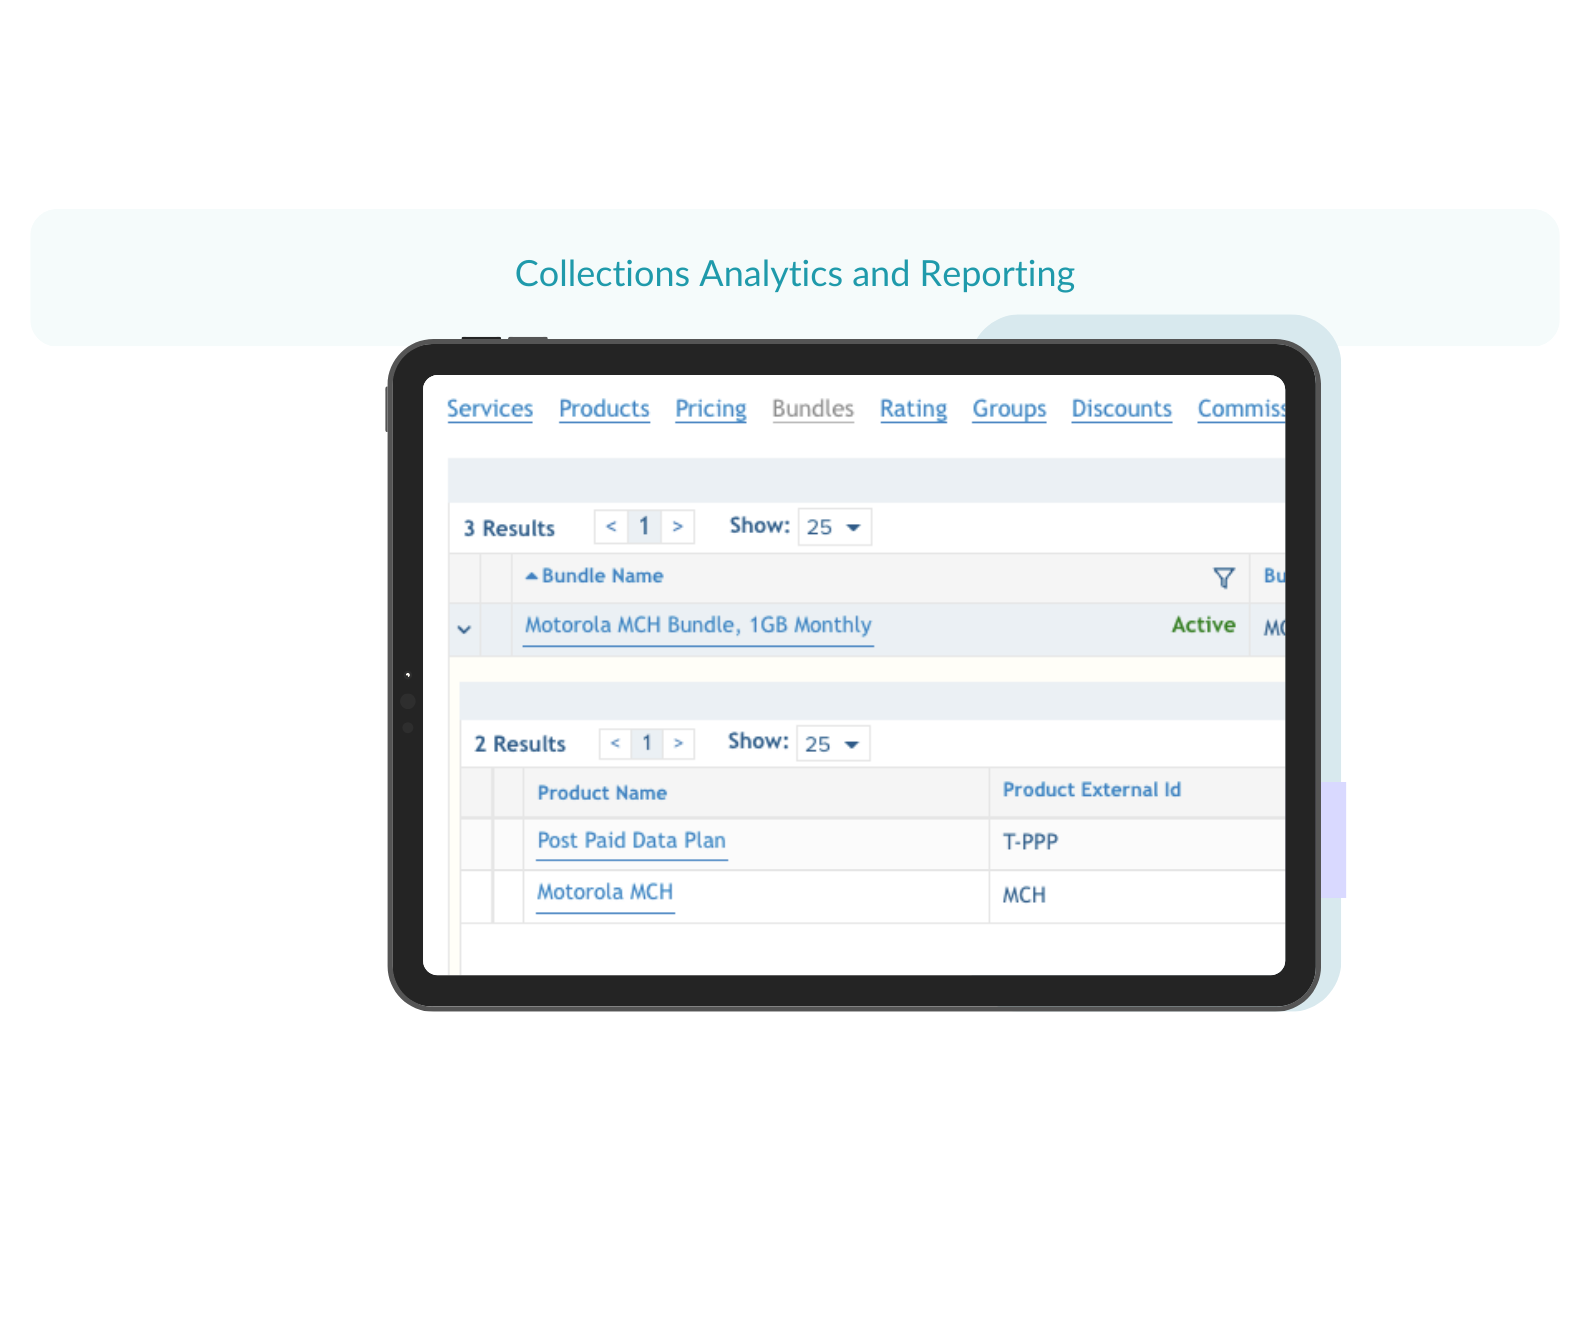 Insightful Data to Drive Collections Strategy